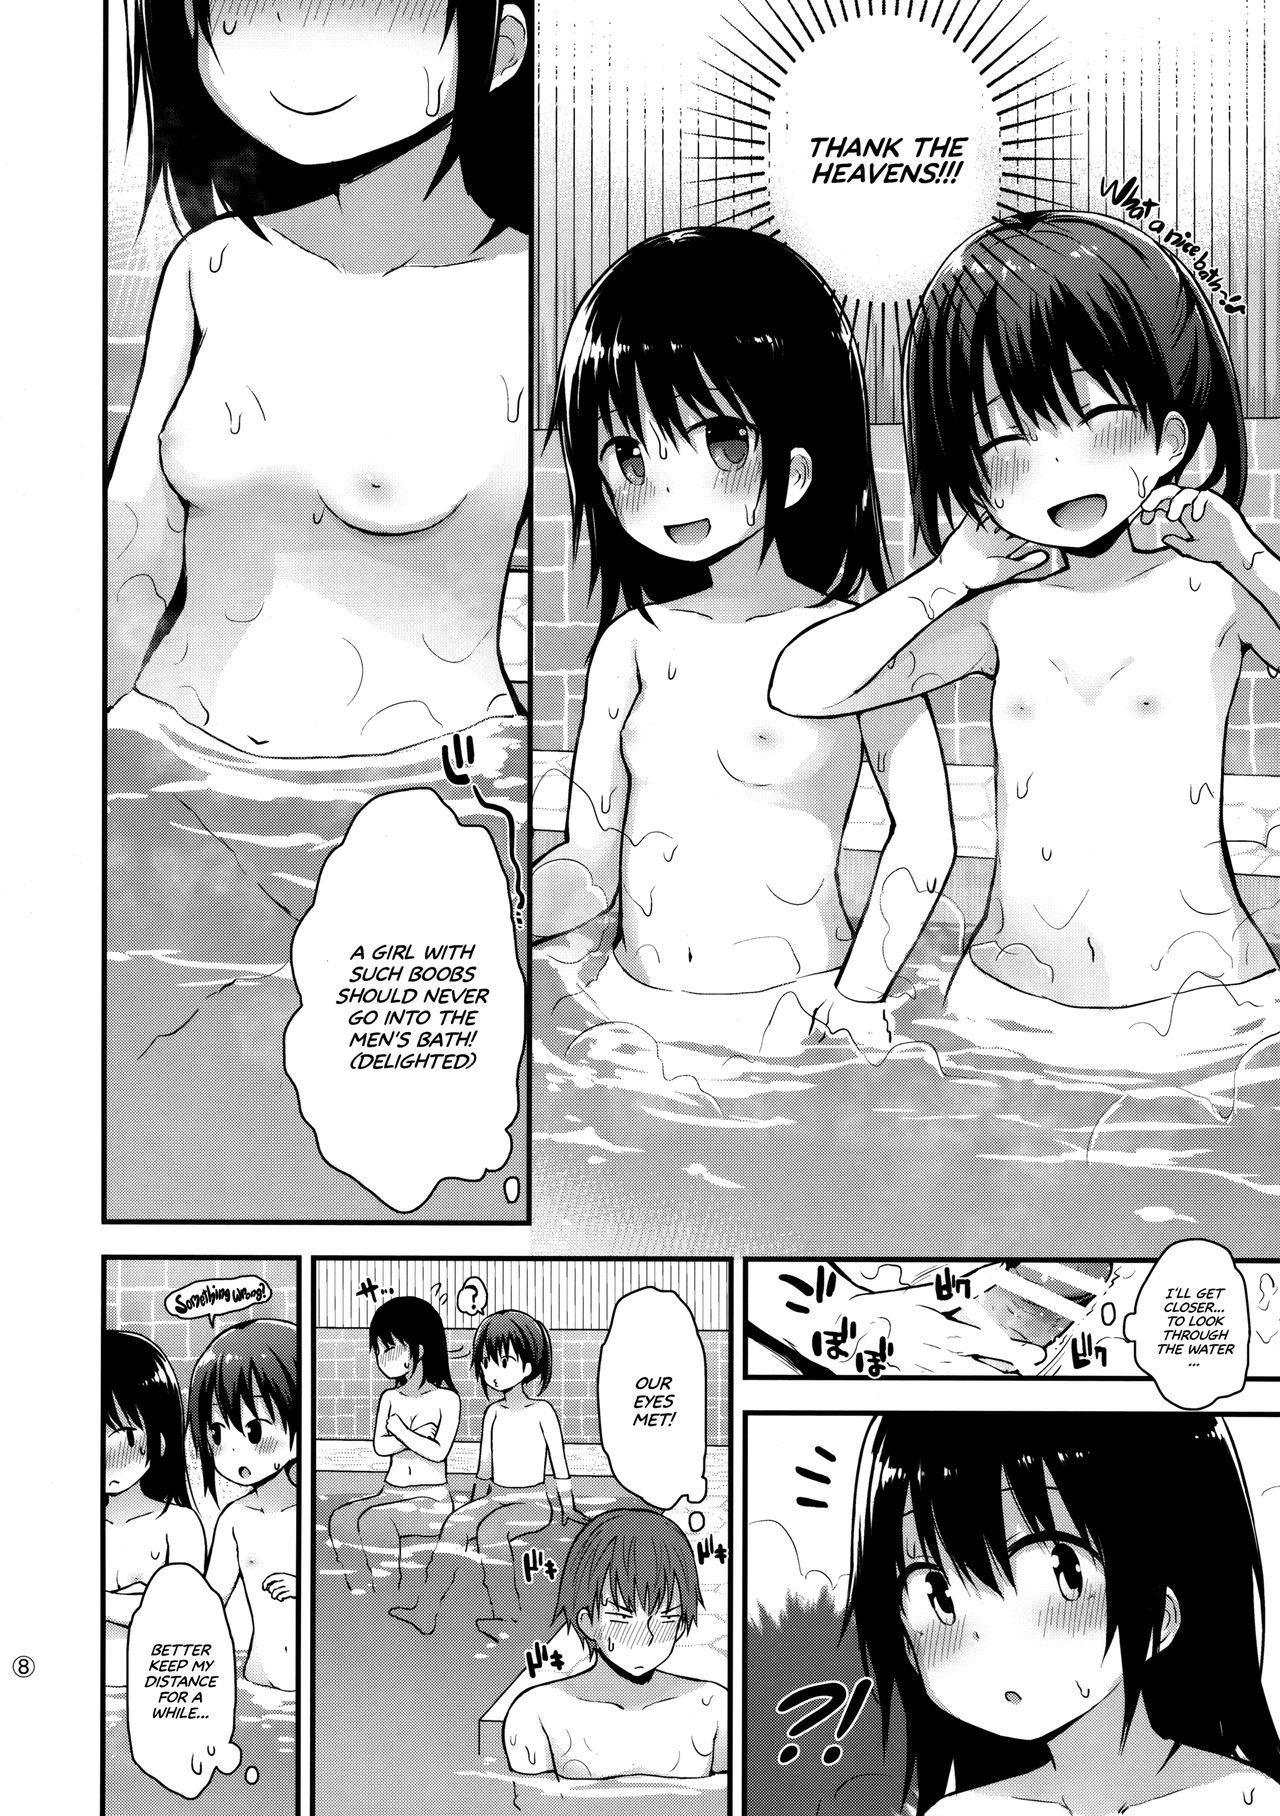 Bigbutt Onnanoko datte Otokoyu ni Hairitai | They may just be little girls, but they still want to enter the men's bath! - Original Amateur - Page 7